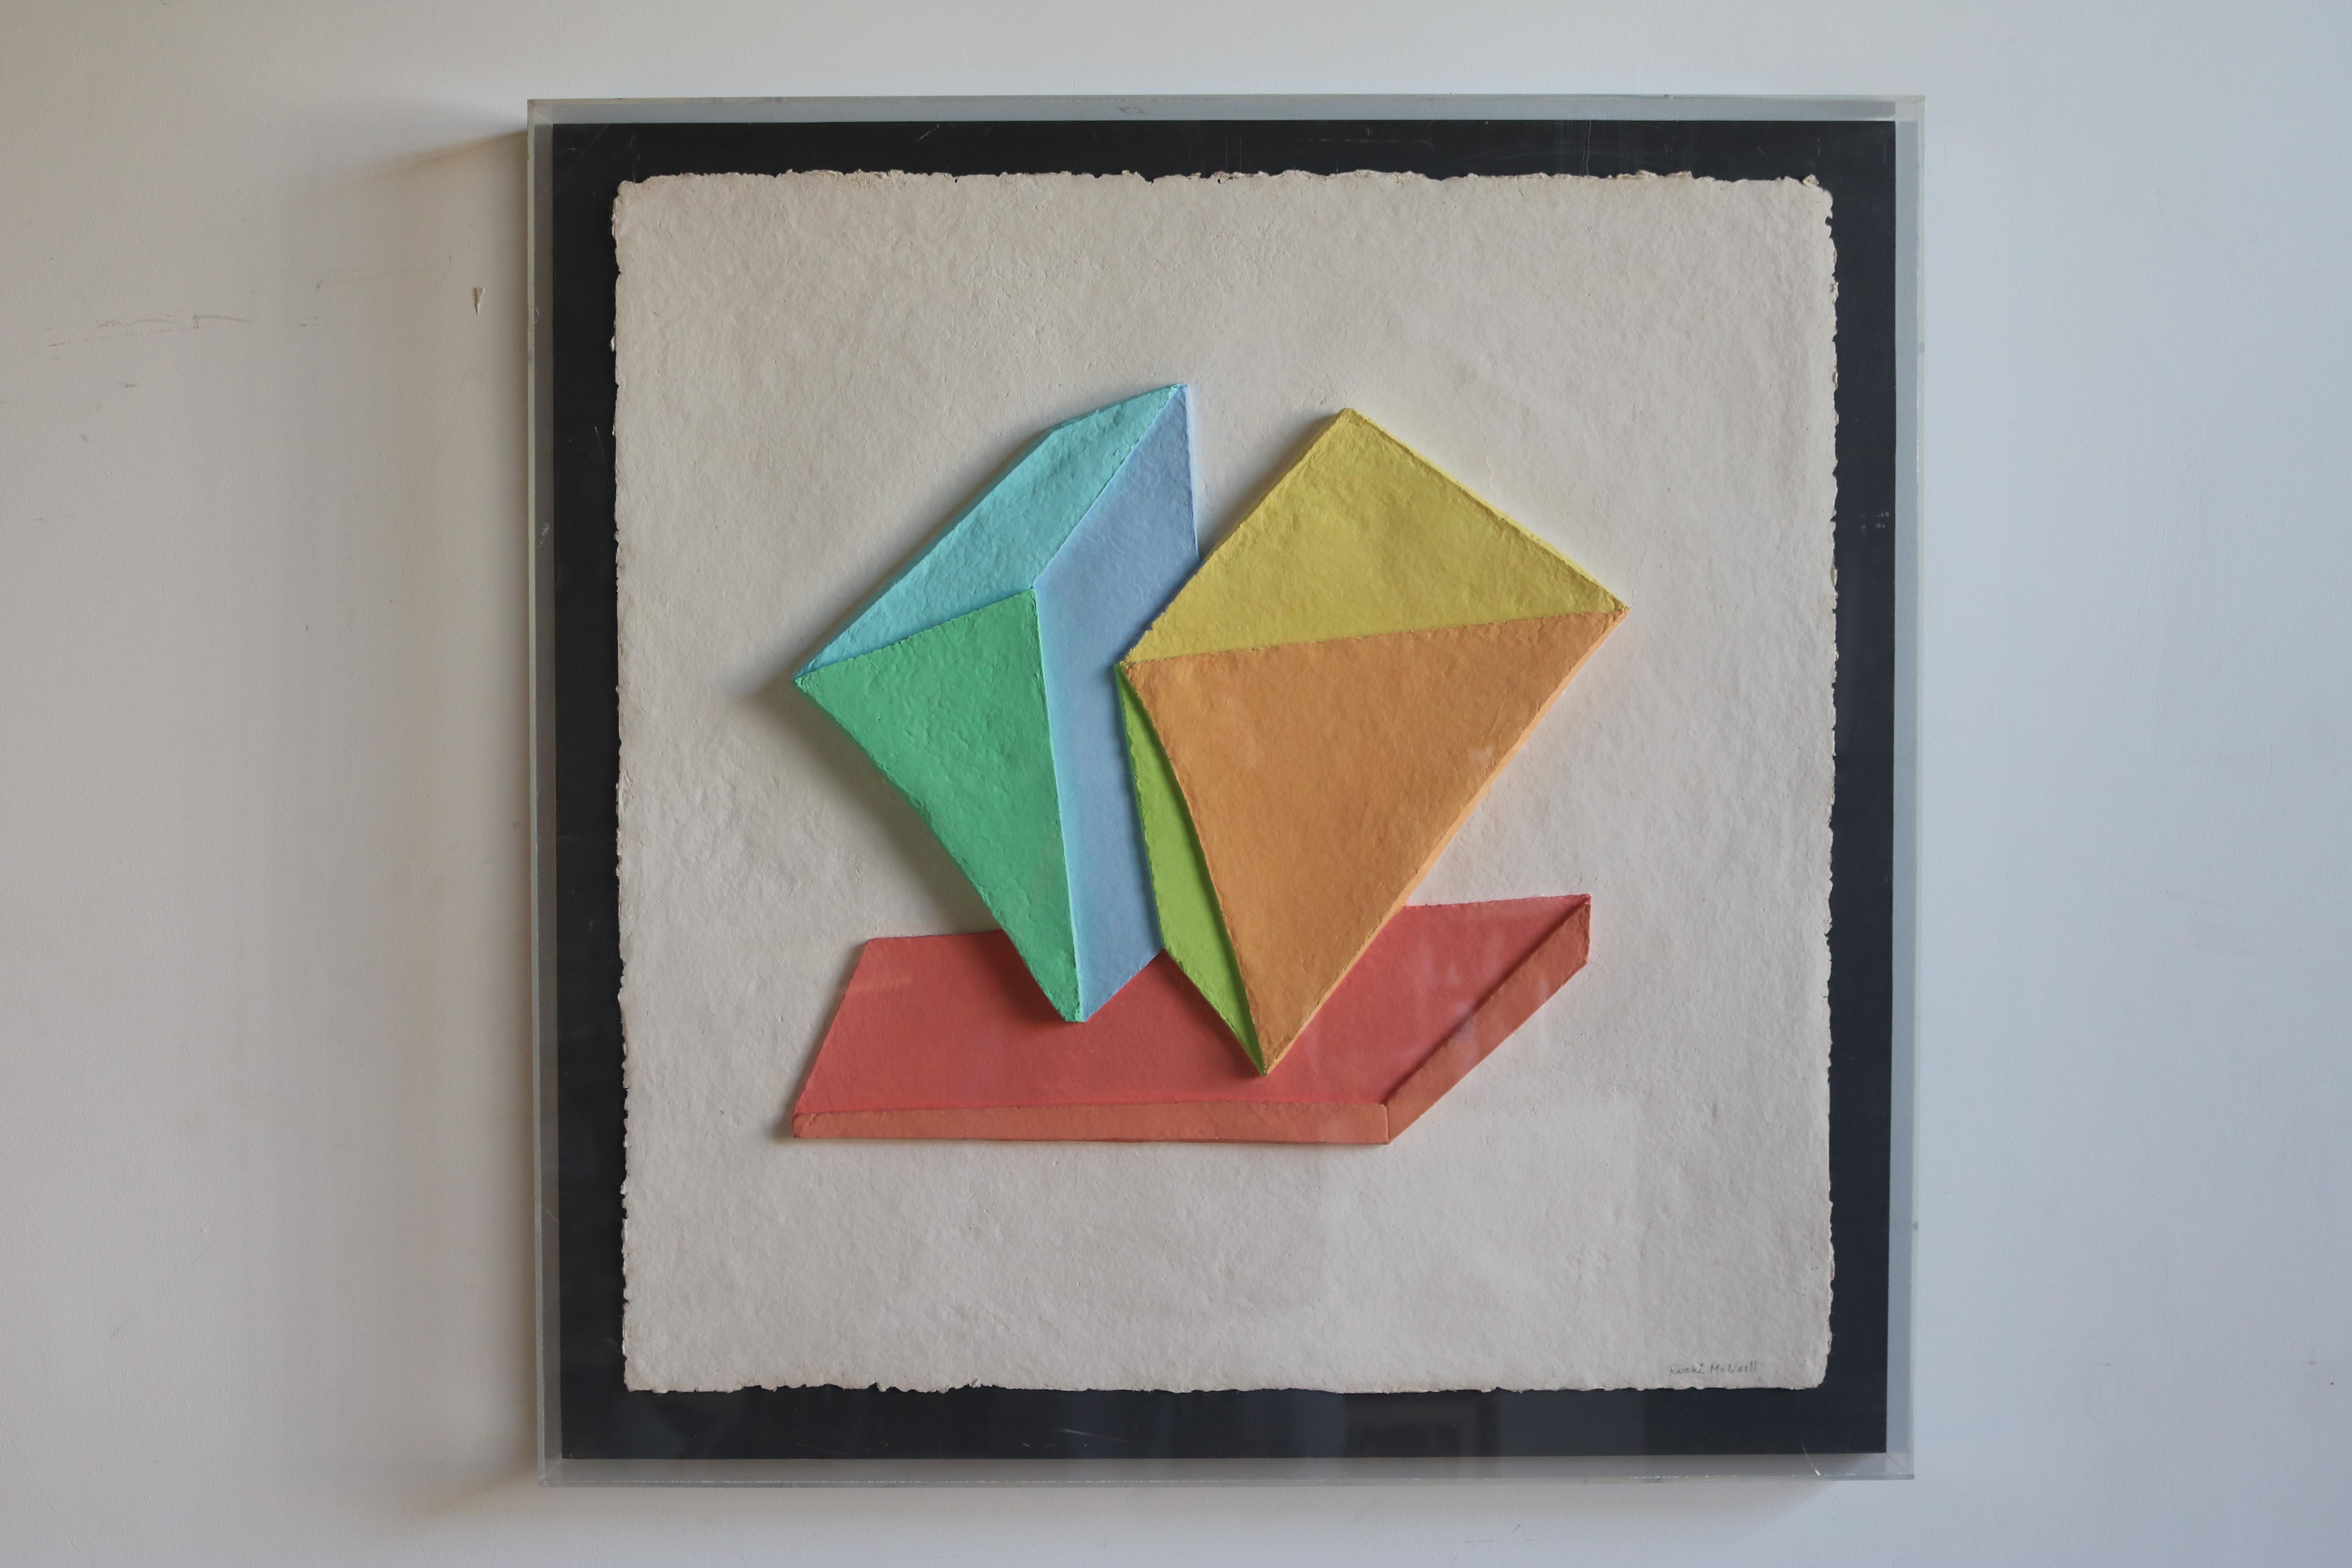 American Emboss Geometric 3D Collage Painting by Ricki McNeill